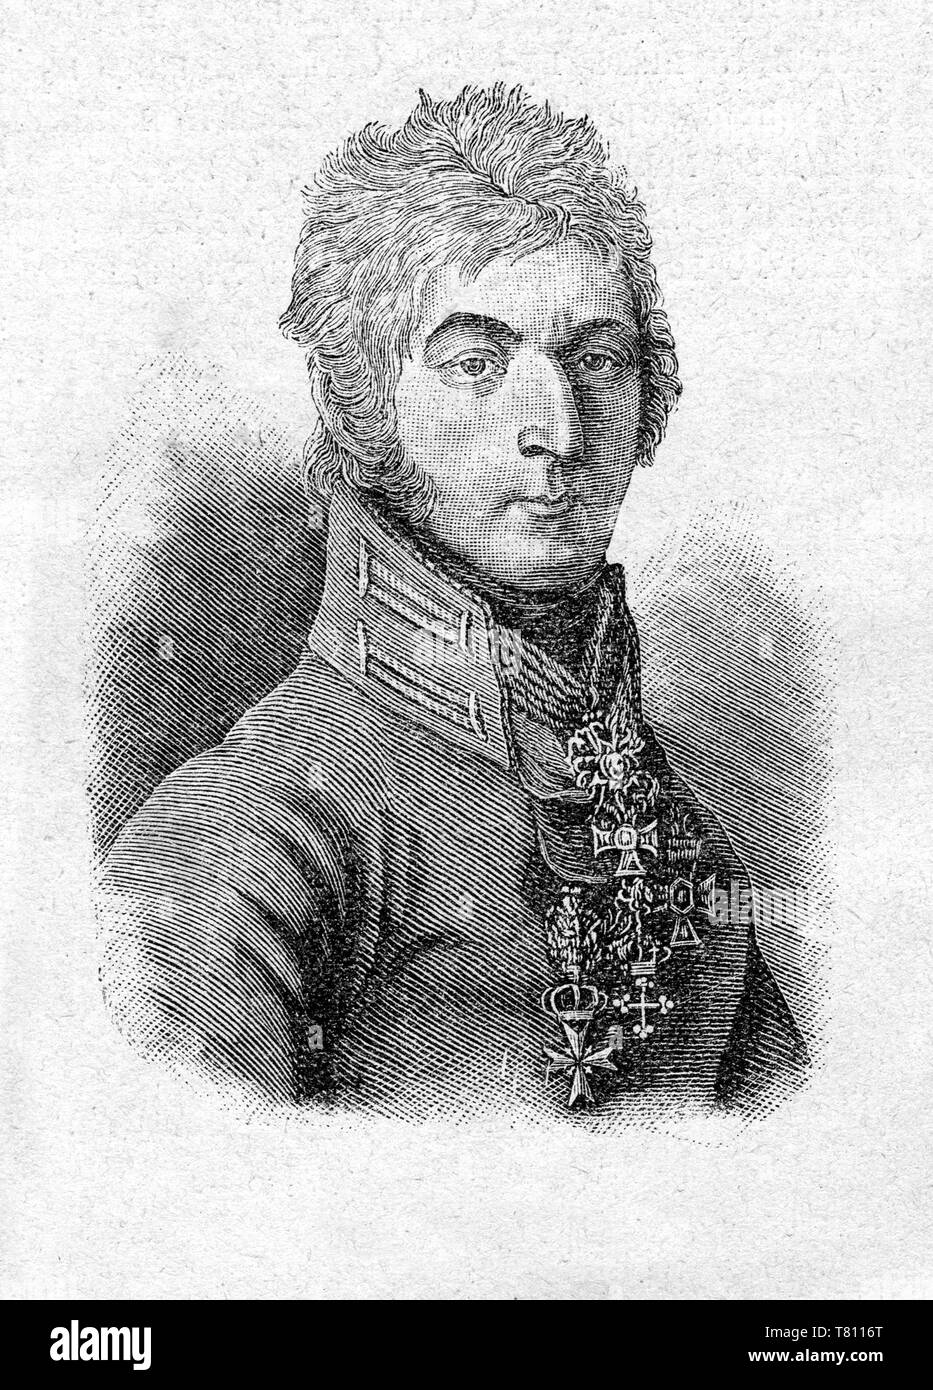 Pyotr Bagration, a Russian general and prince of Georgianorigin, prominent during the Napoleonic Wars/1812/. Digital improved reproduction from Illustrated overview of the life of mankind in the 19th century, 1901 edition, Marx publishing house, St. Petersburg Stock Photo